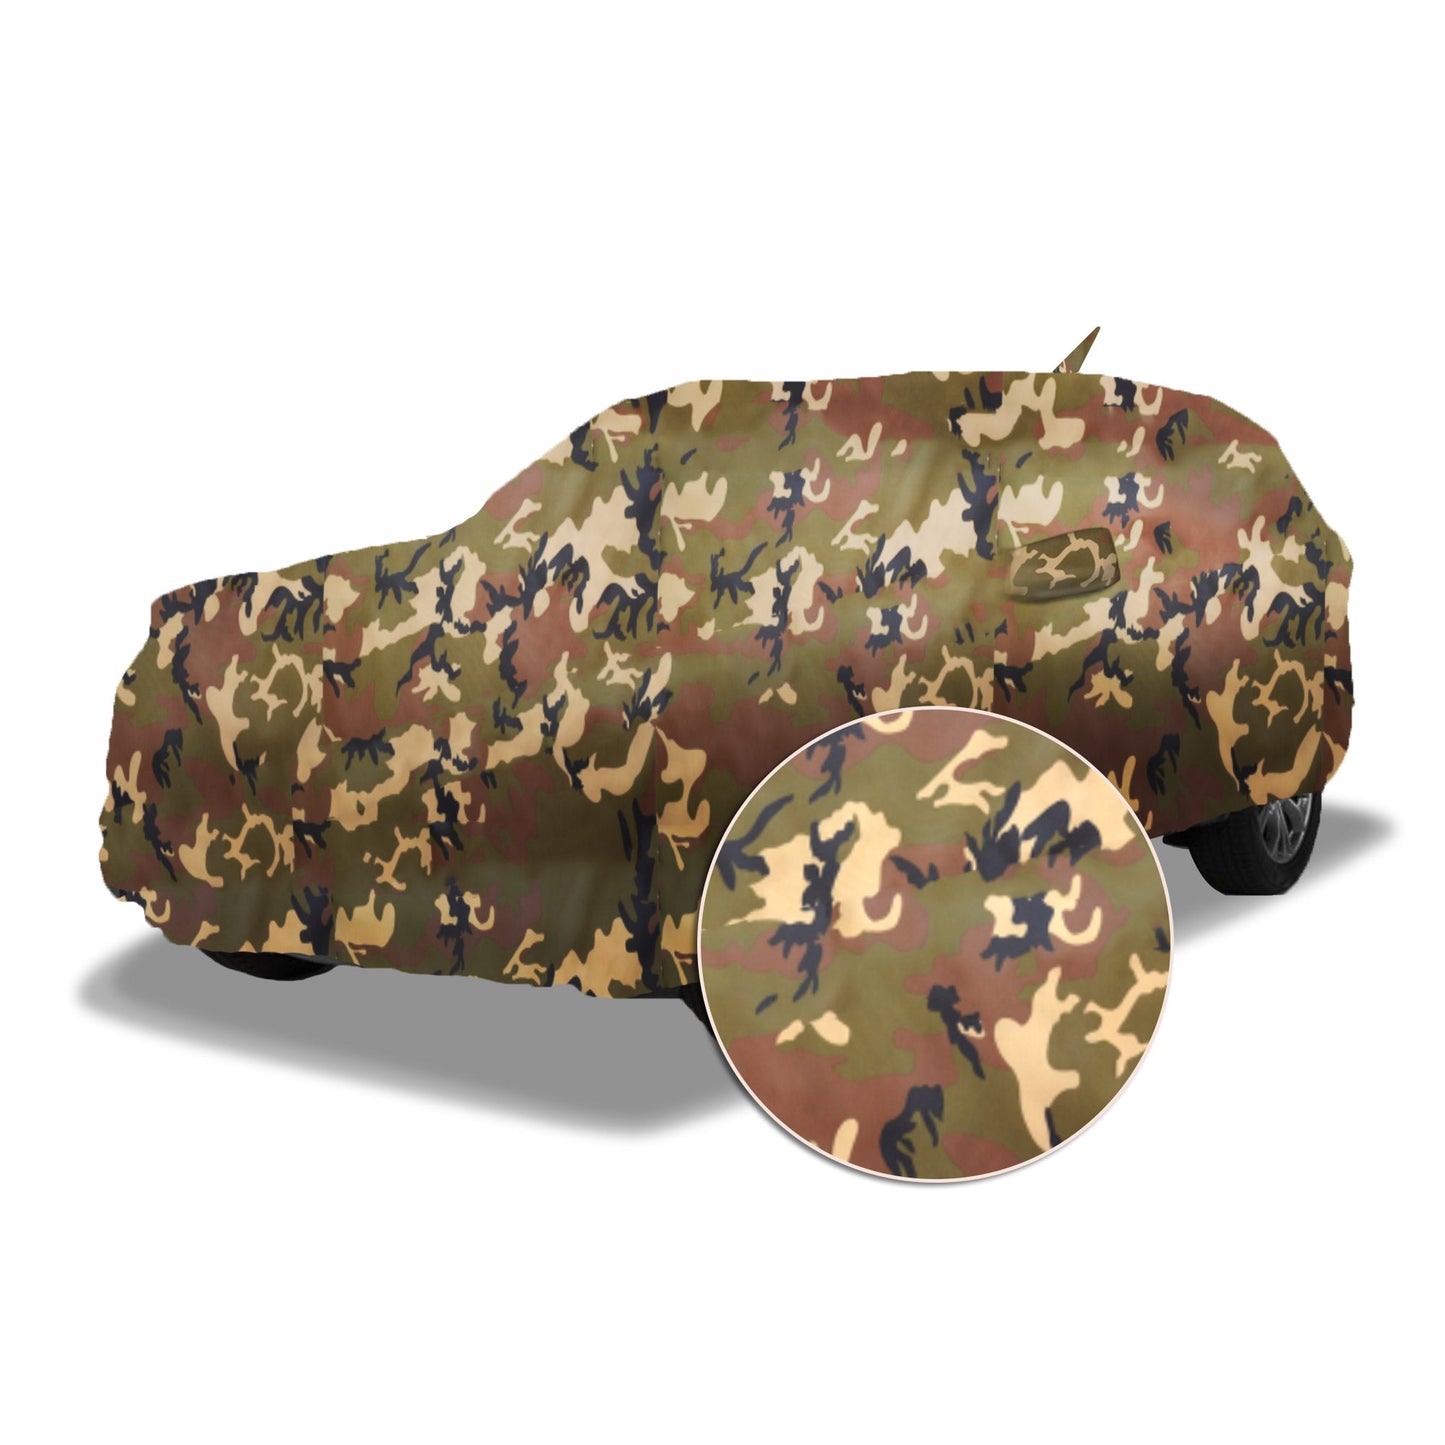 Ascot Maruti Suzuki Ertiga 2012-2018 Model Car Body Cover Extra Strong & Dust Proof Jungle Military Car Cover with UV Proof & Water-Resistant Coating